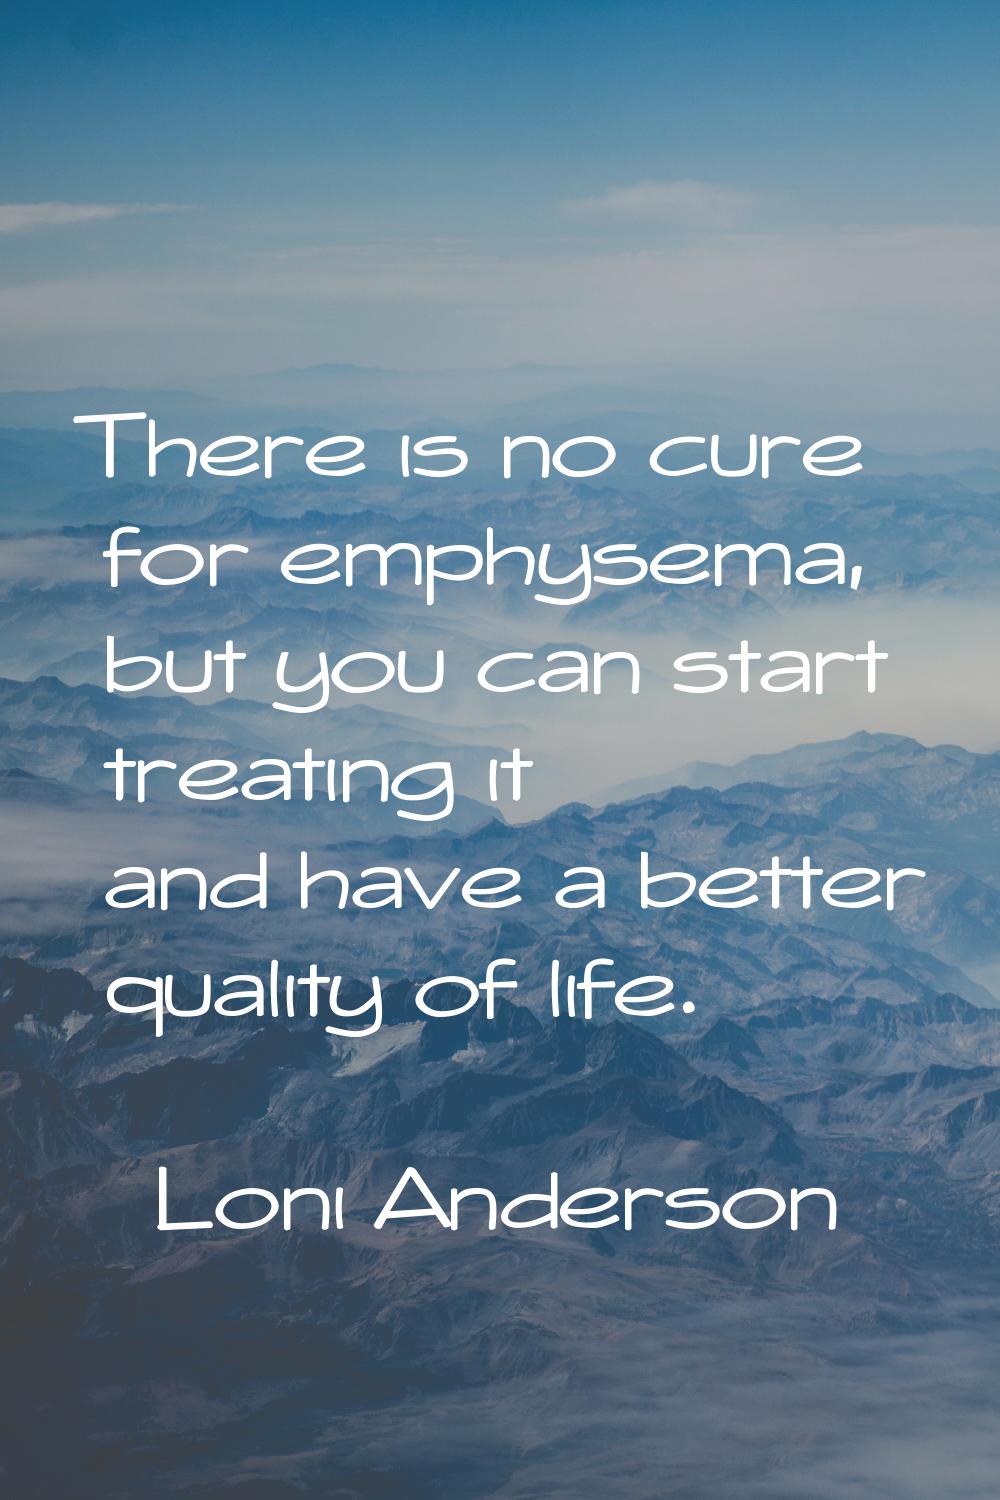 There is no cure for emphysema, but you can start treating it and have a better quality of life.